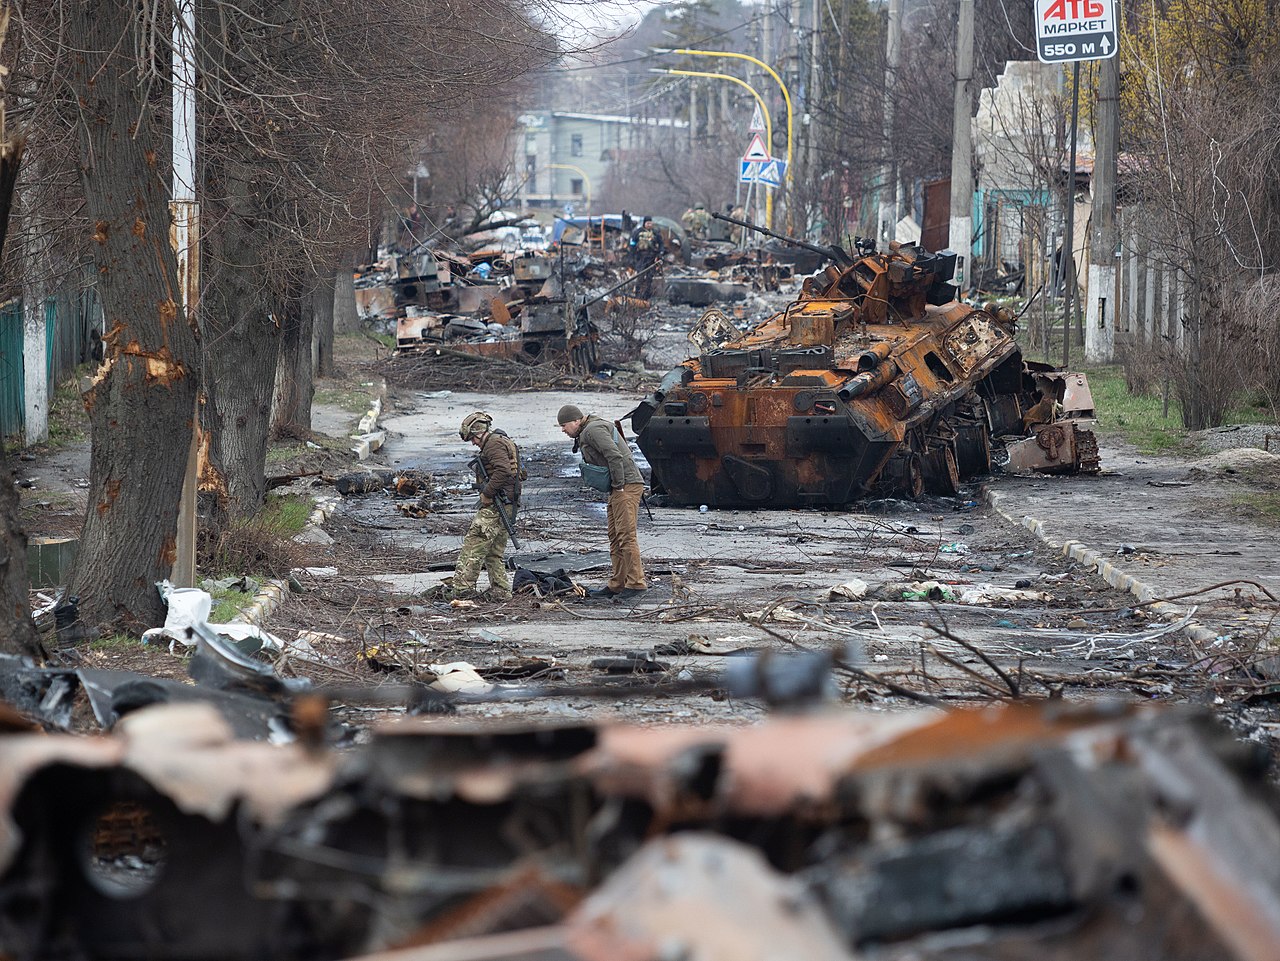  The main street in Bucha, Ukraine after a Russian attack, April, 2022.